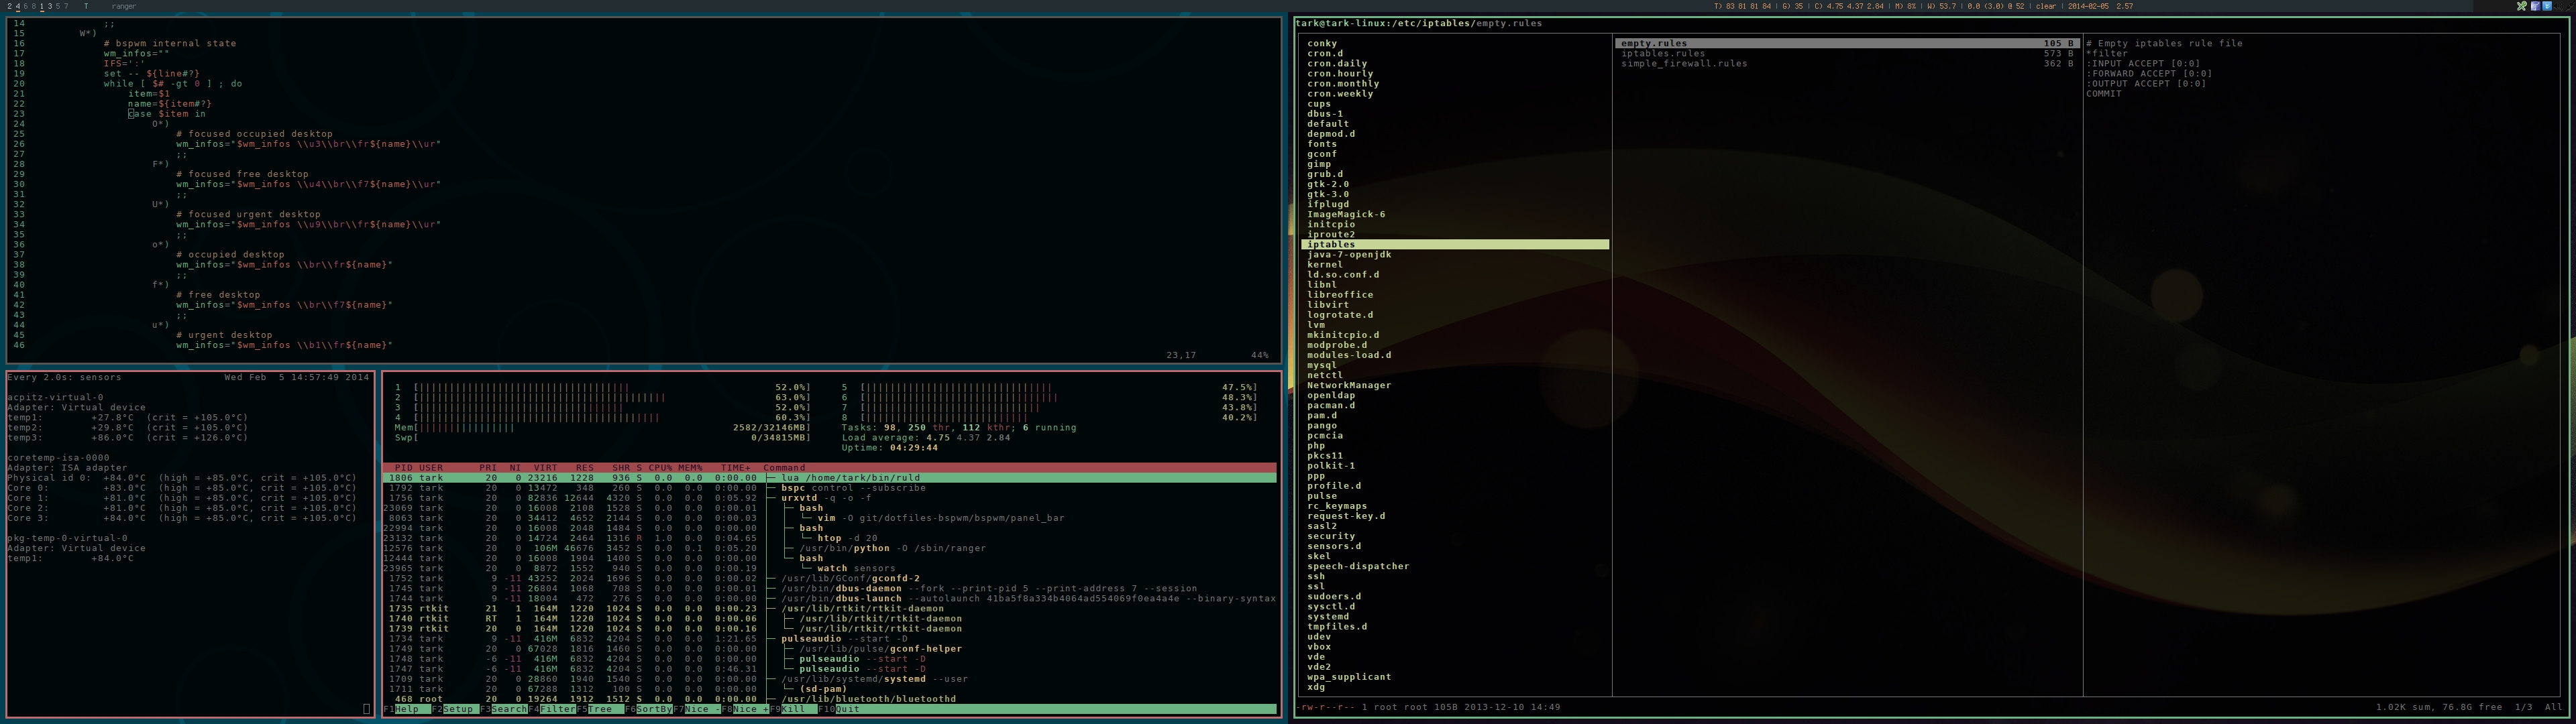 Linux desktop using the binary space partitioning tiling window manager (BSPWM)